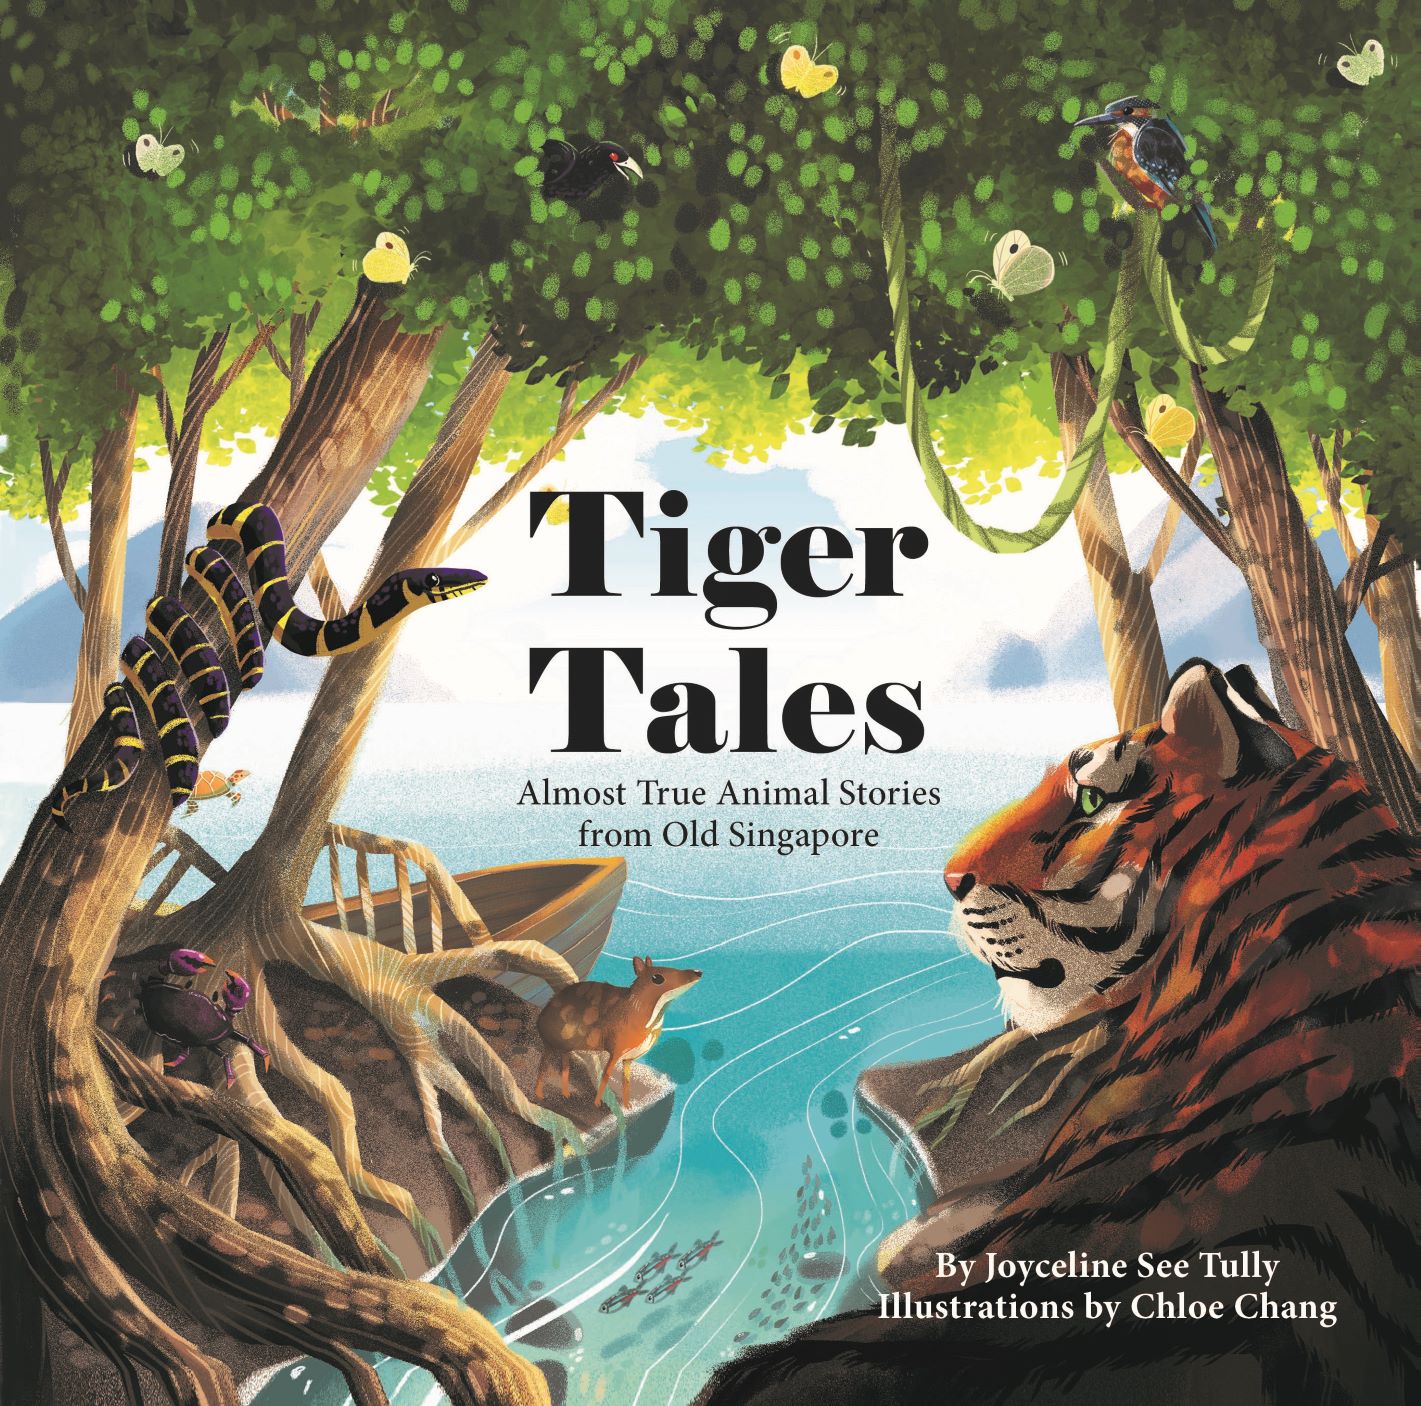 Tiger Tales: Almost True Animal Stories from Old Singapore